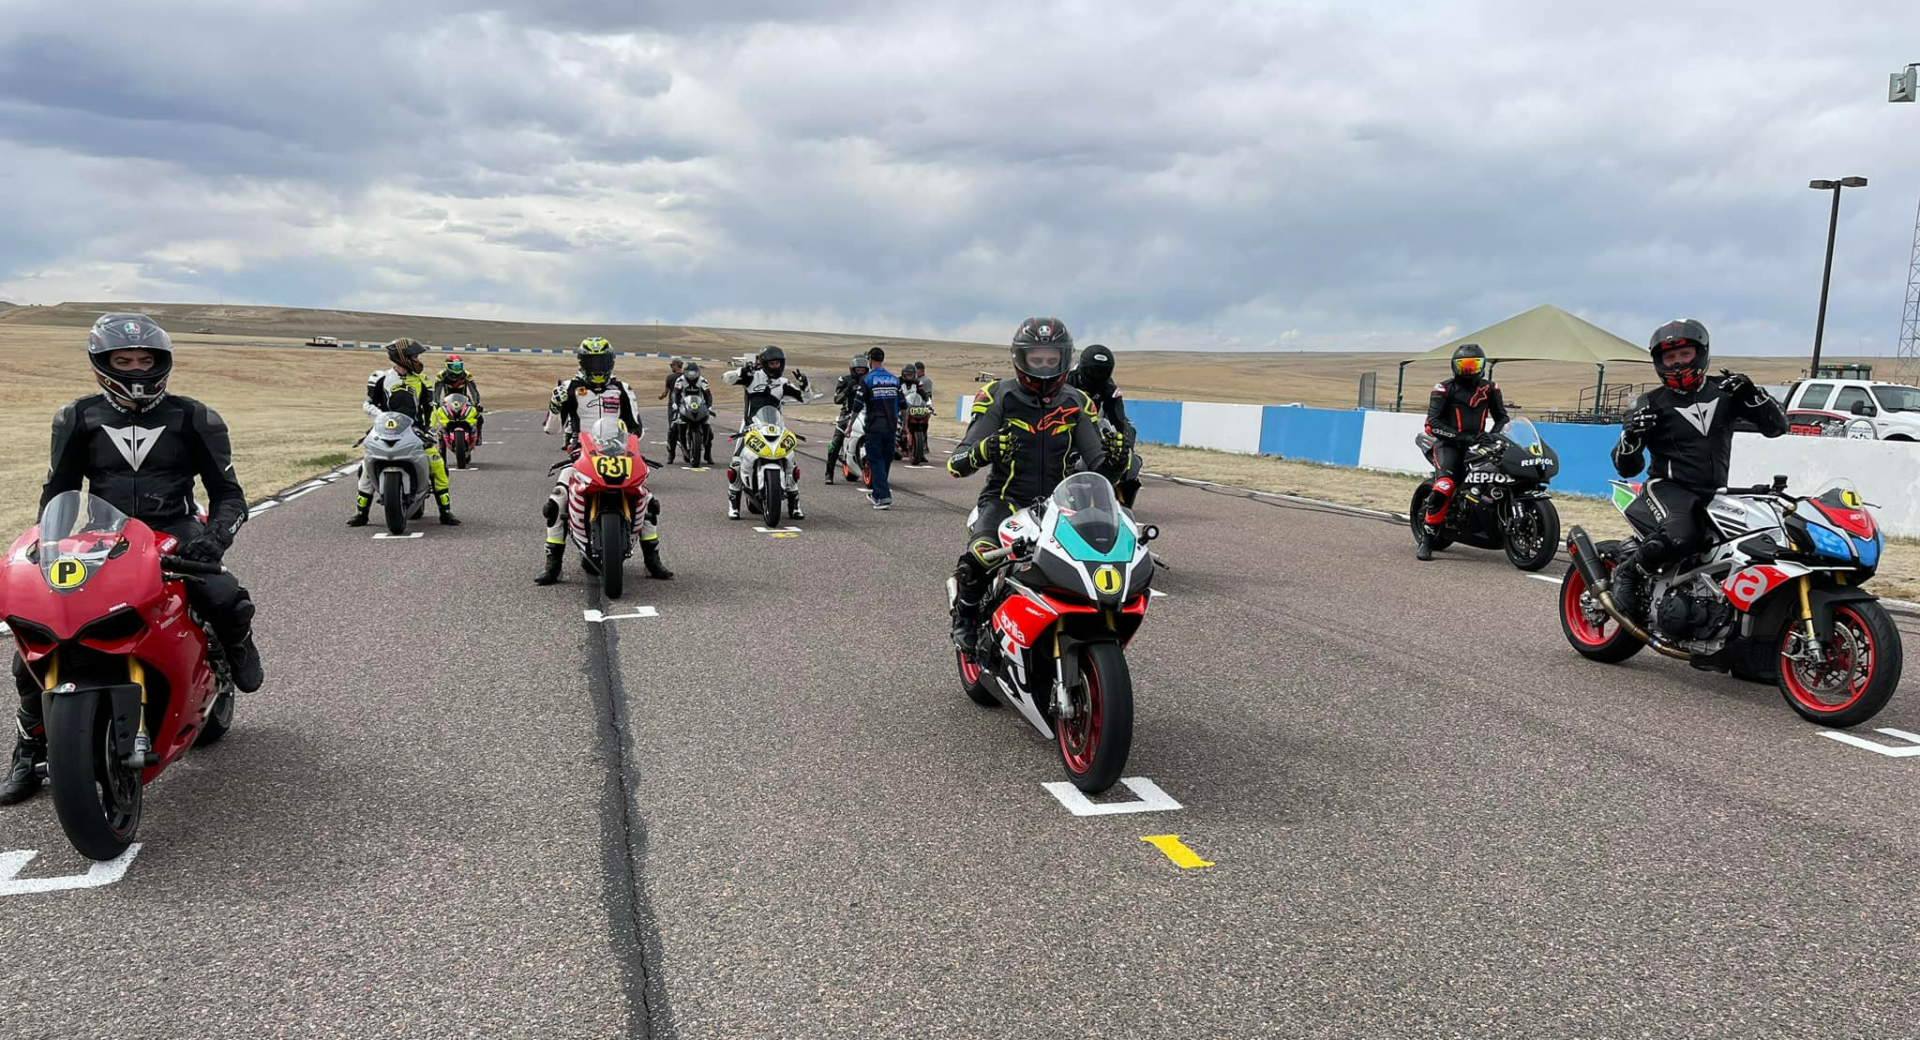 Some students line up on the grid for a practice start during the MRA New Racer School April 9 at High Plains Raceway. Photo courtesy MRA.